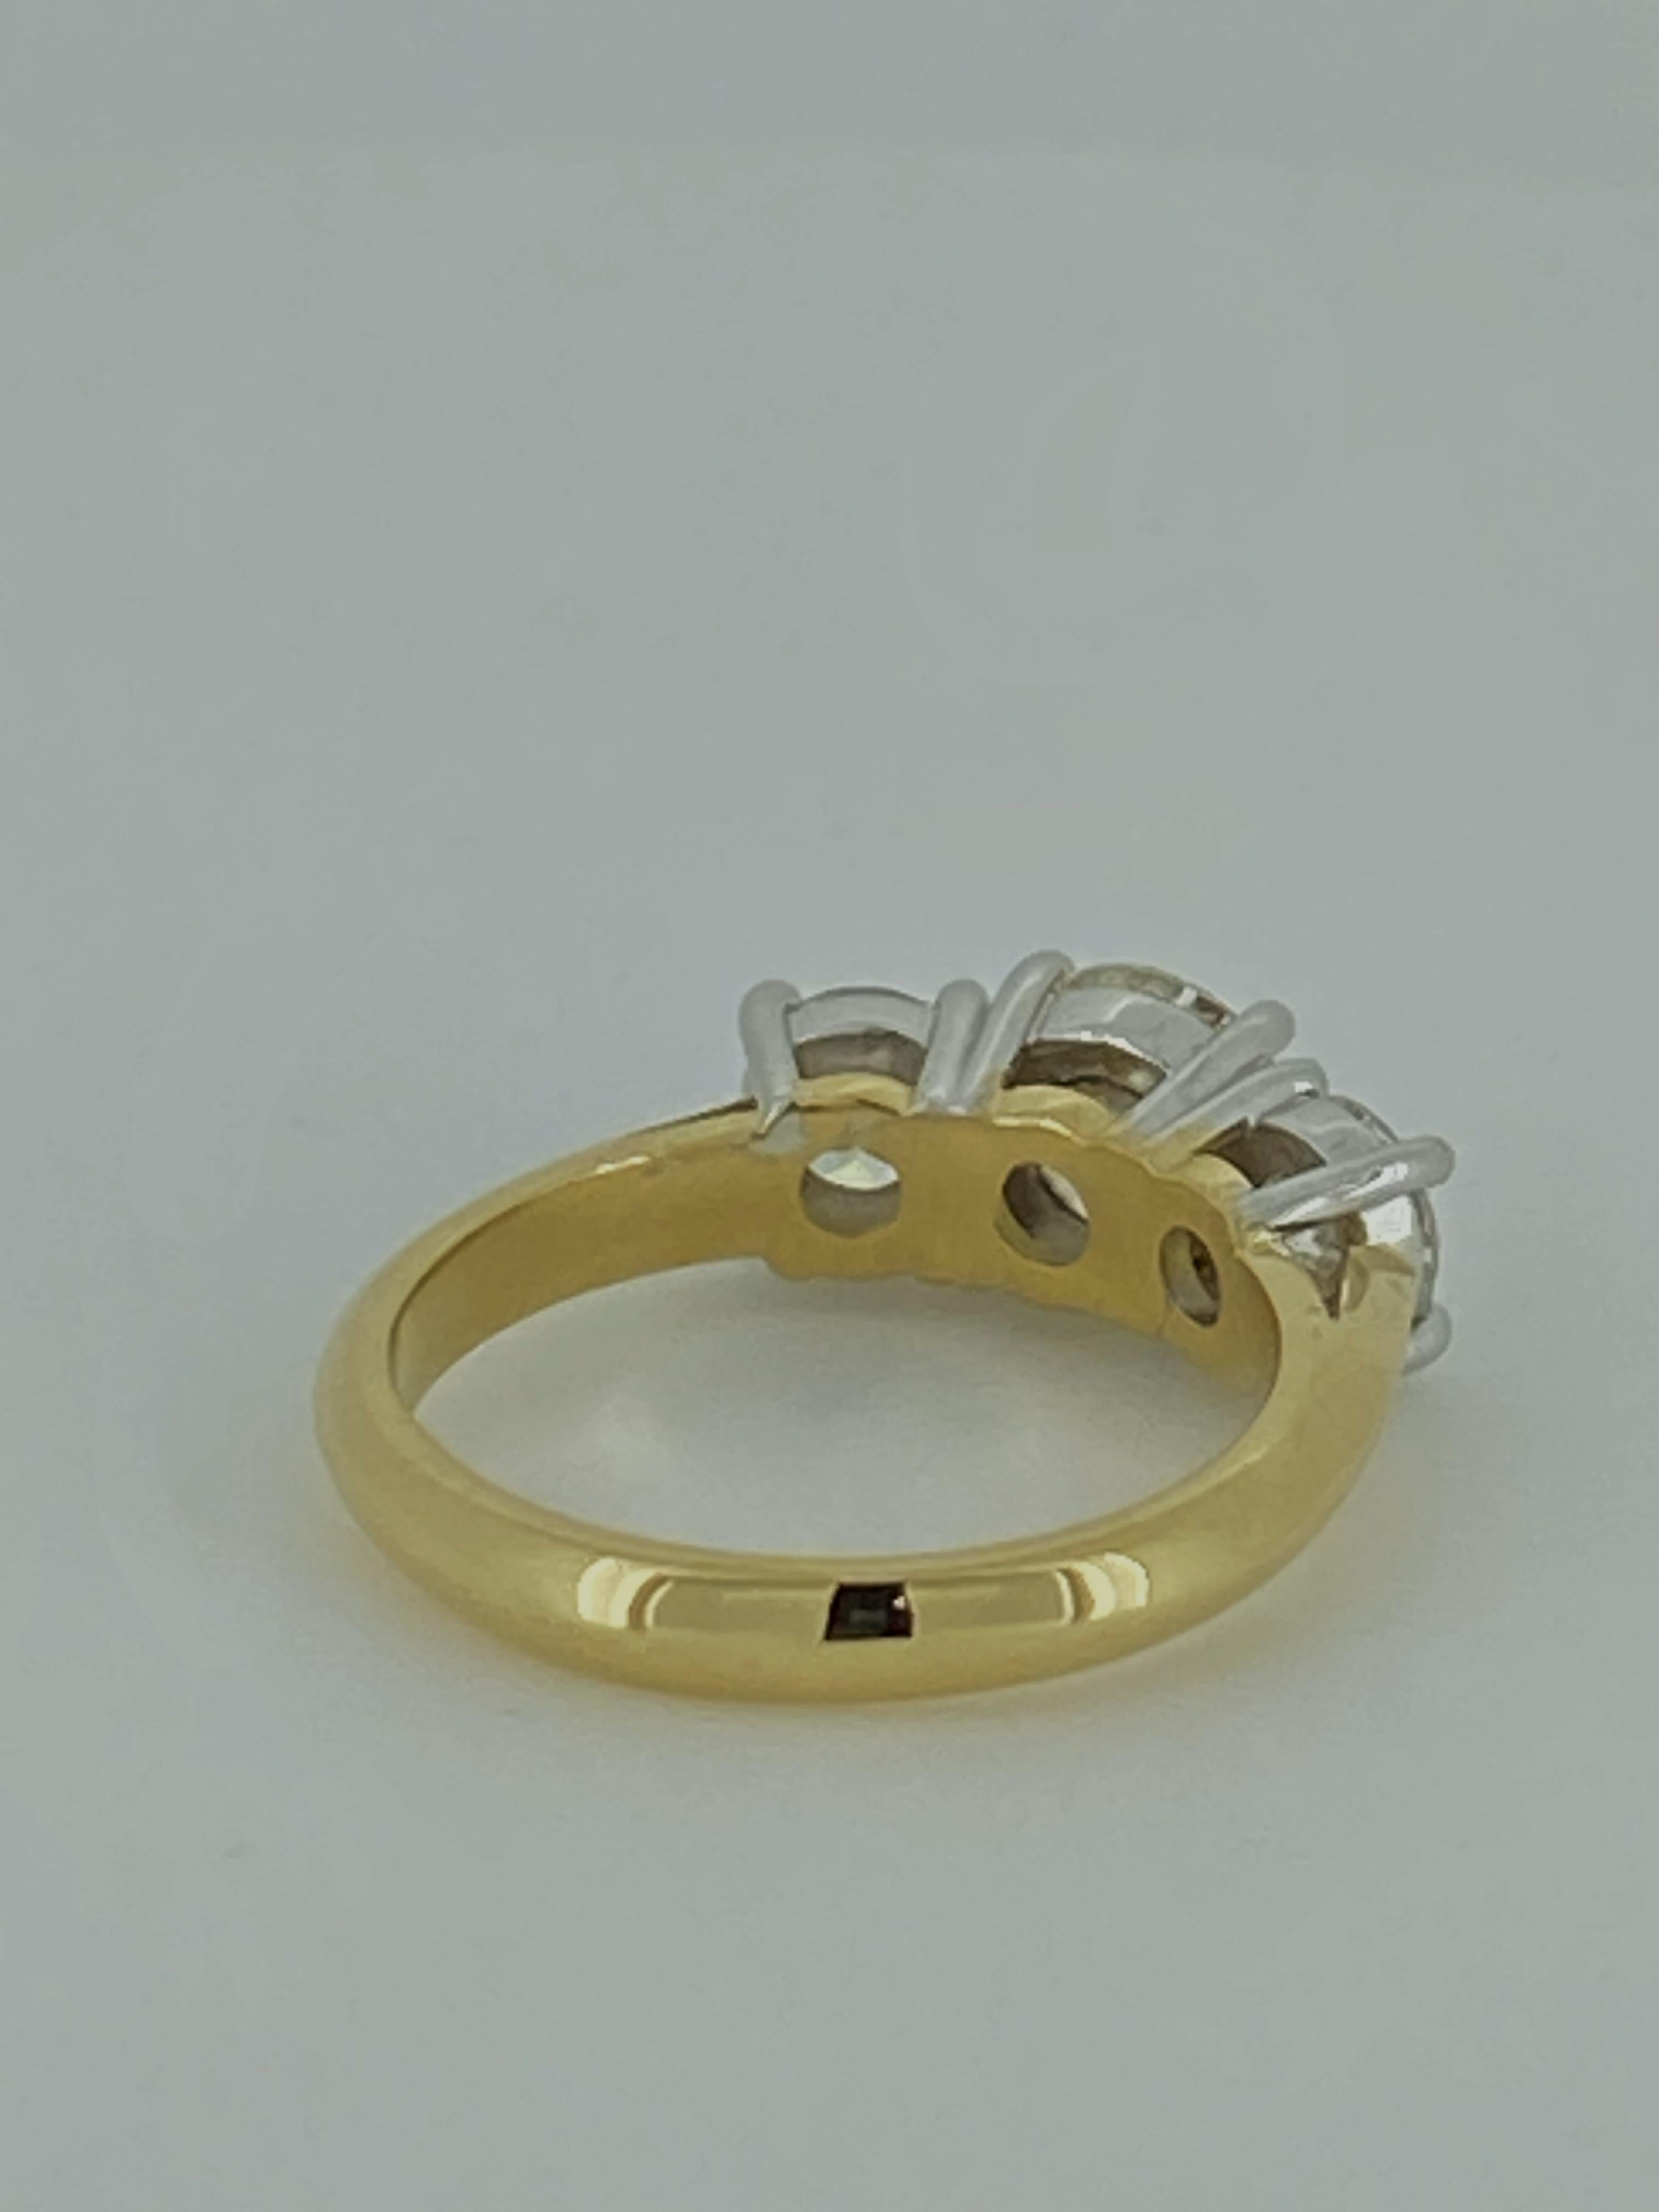 Superb 2.05ct 3-Stone Diamond Ring in 18K Gold. Center stone: 1.05ct, Ideal Cut. For Sale 3